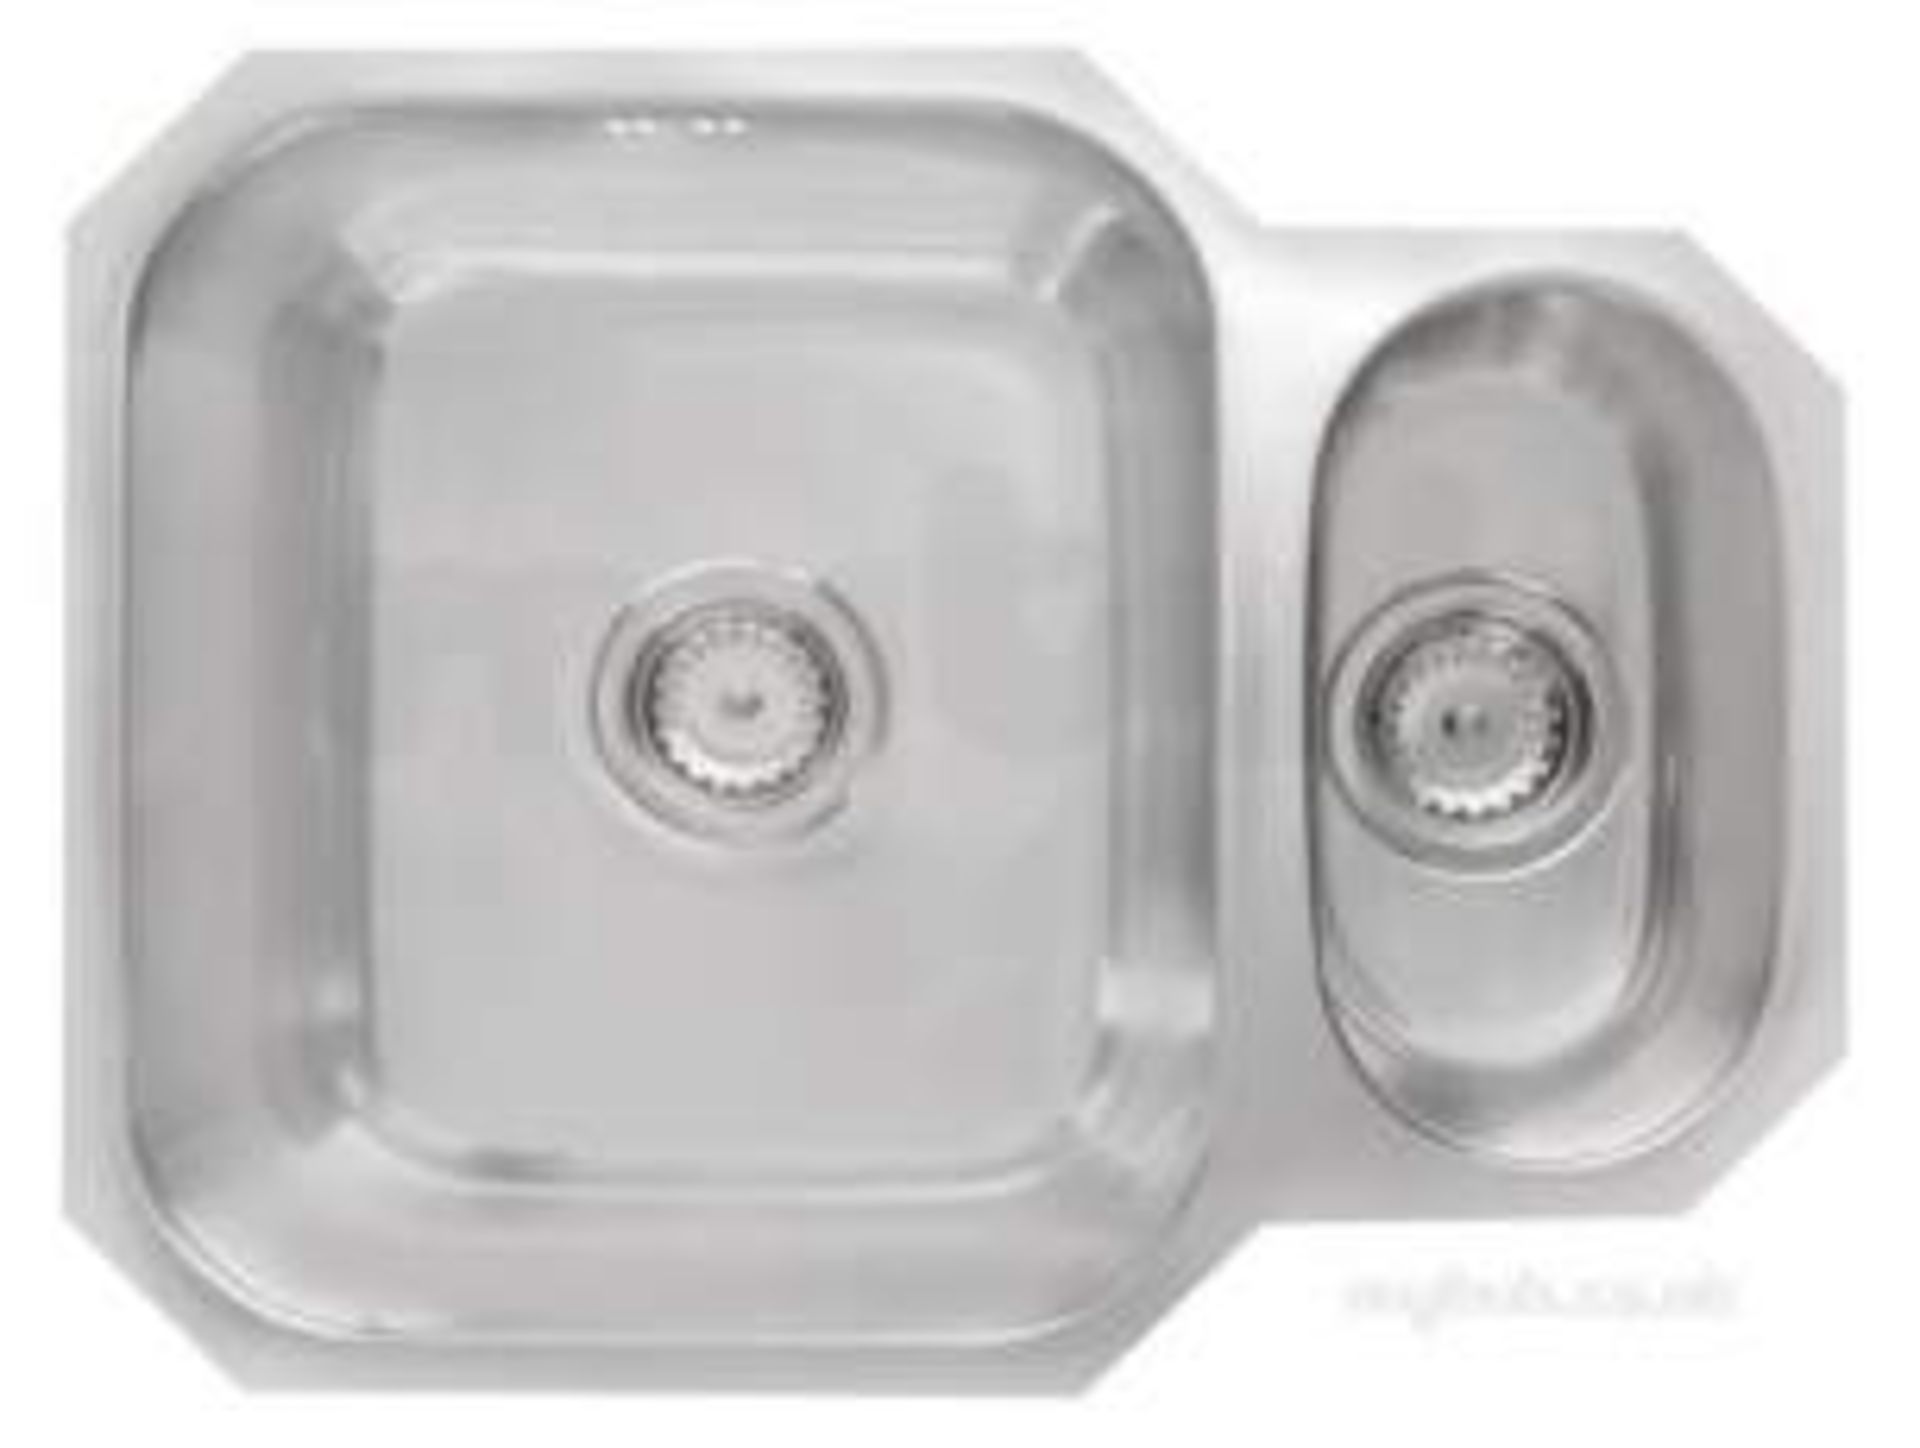 (Qp168) 600mm 15B Reversible Undermount Sink Stainless Steel Fitted With High-Density Sound Dea...